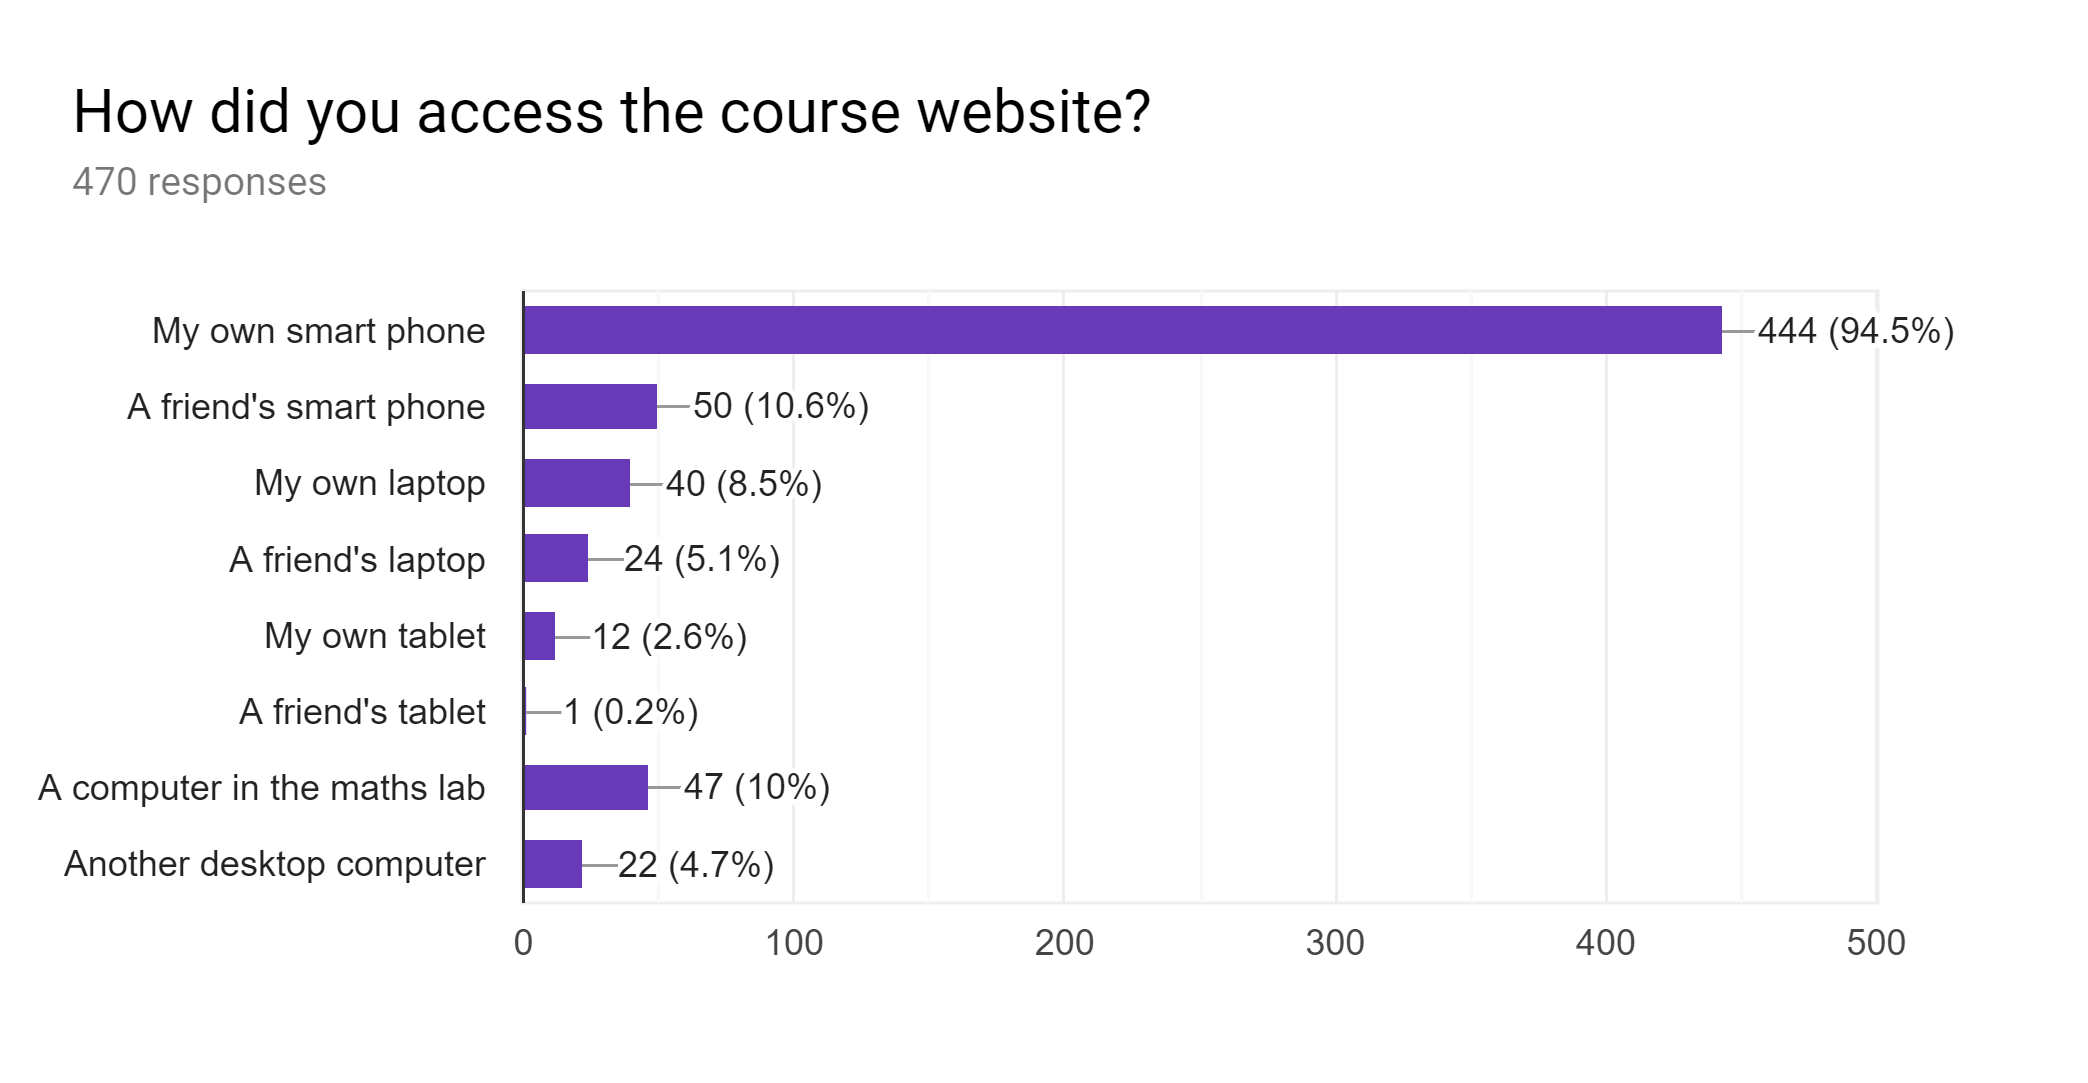 How did you access the course website? 470 responses. My own smartphone: 444, my friend's smart phone: 50, a computer in the maths lab: 47, my own laptop: 40, a friend's laptop: 24... 